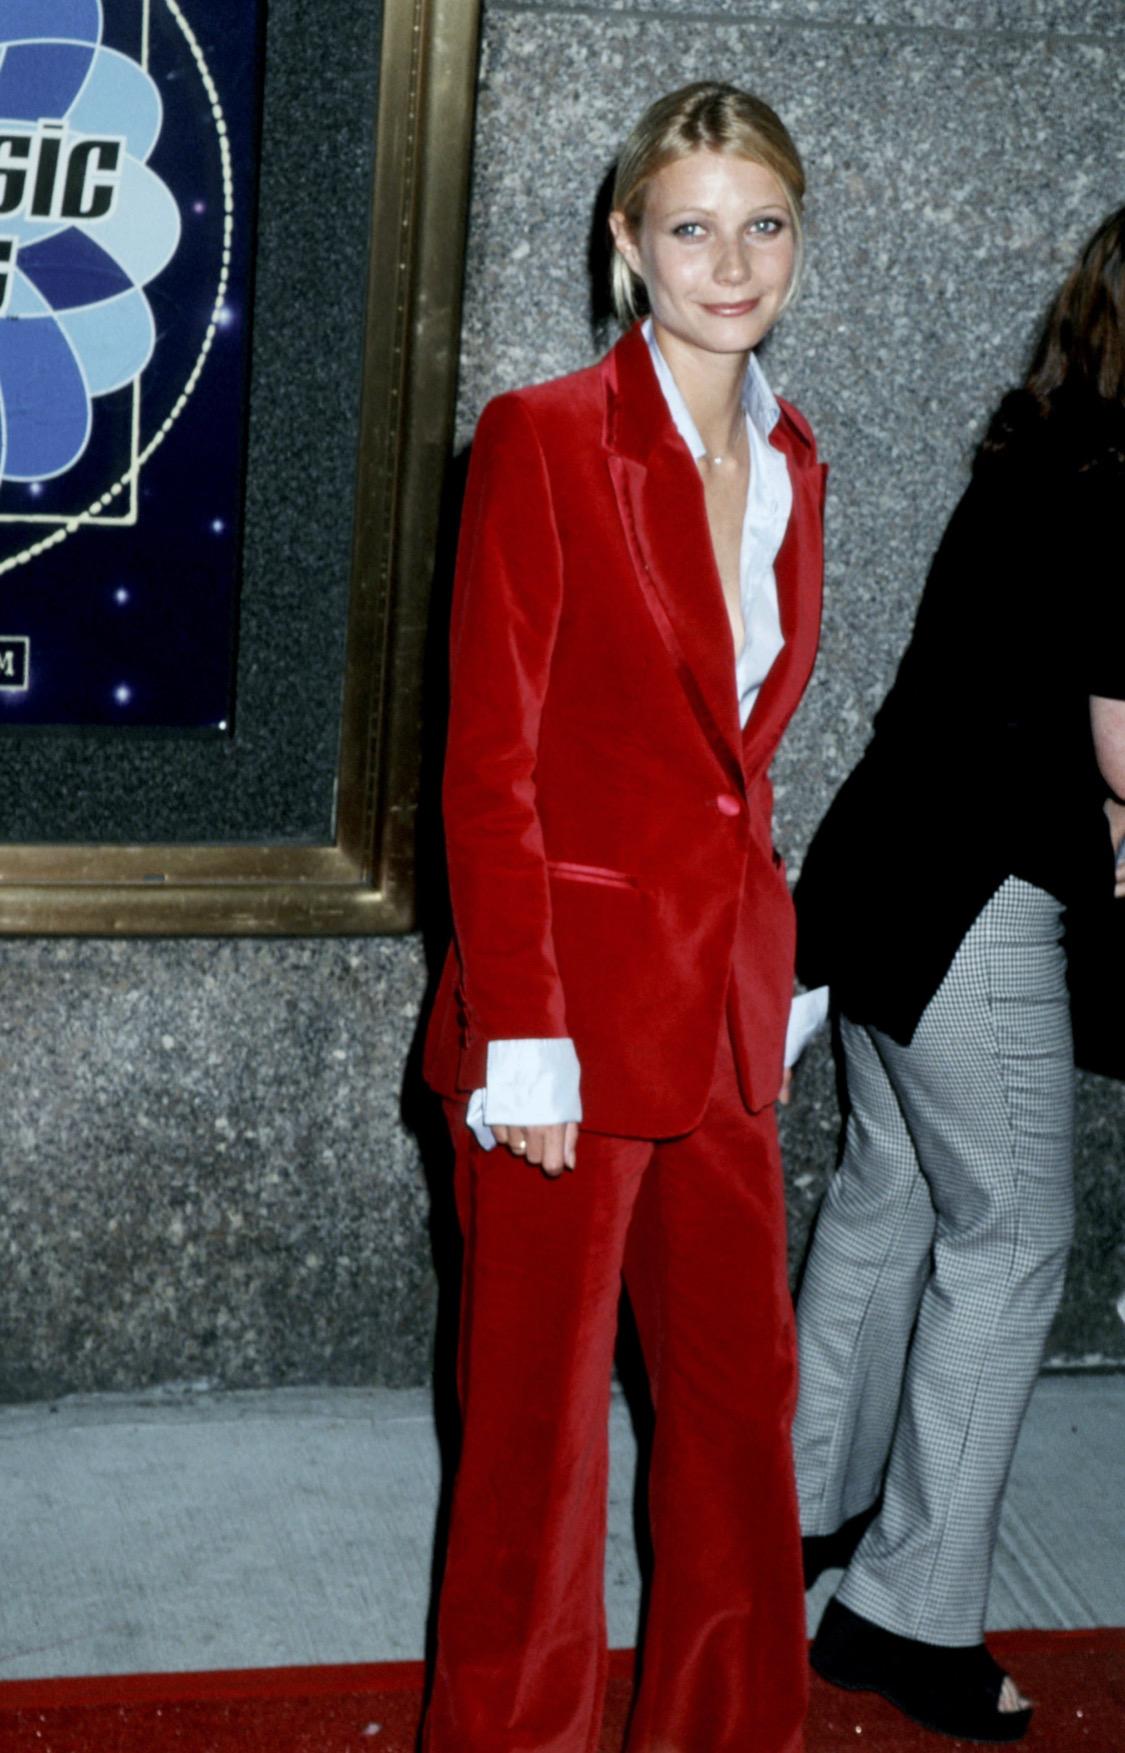 TheRealList presents: the Tom Ford for Gucci red velvet suit. One of Ford's most, if not the most, iconic designs is this red velvet pant suit which debuted on the Fall/Winter 1996 runway as look 39 modeled by Trish Goff. This suit was famously worn